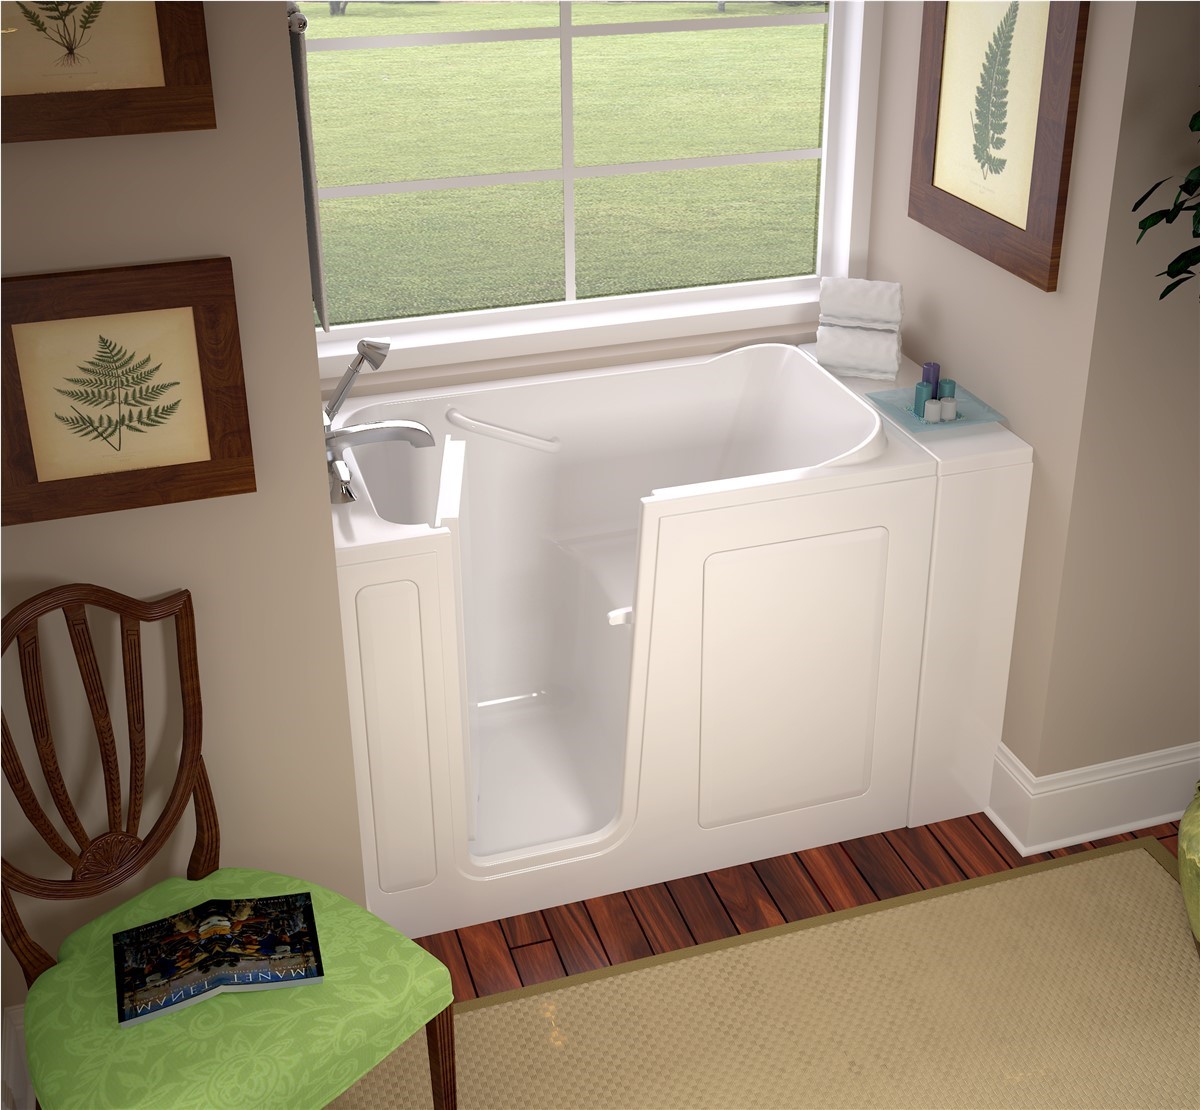 Four Reasons You Should Get a Walk-In Tub